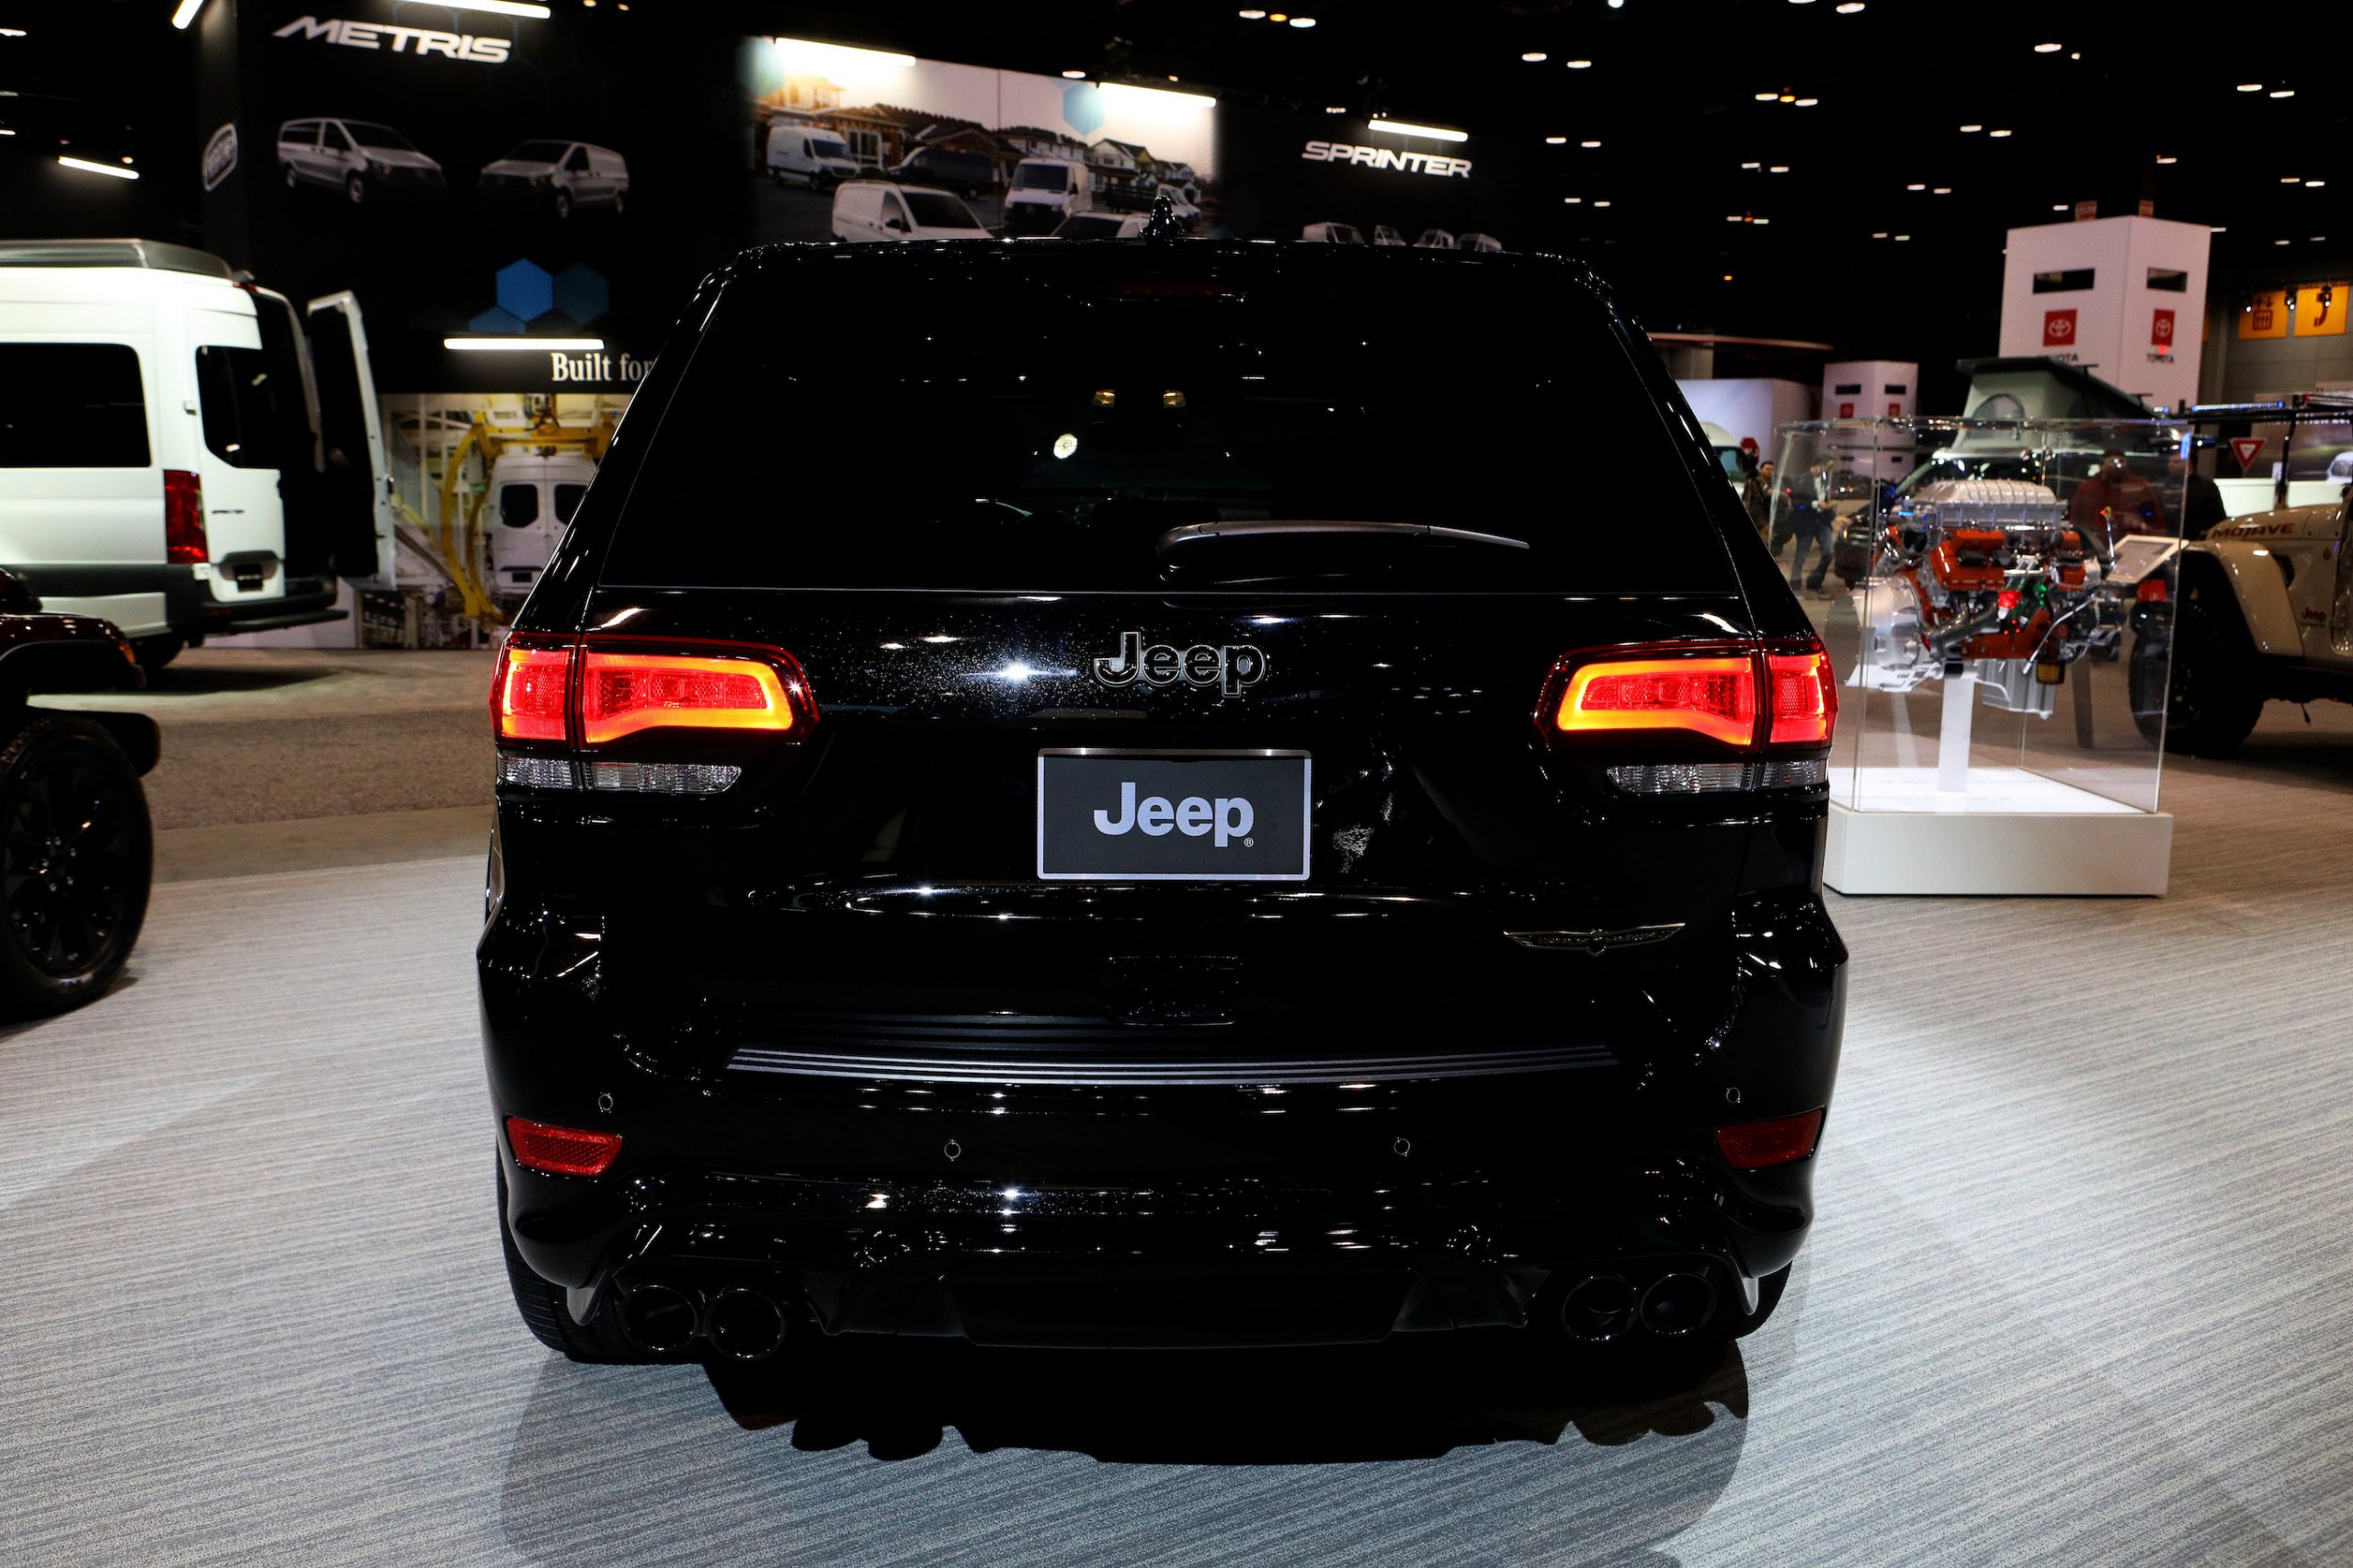 2020 Jeep Grand Cherokee Trackhawk is on display at the 112th Annual Chicago Auto Show